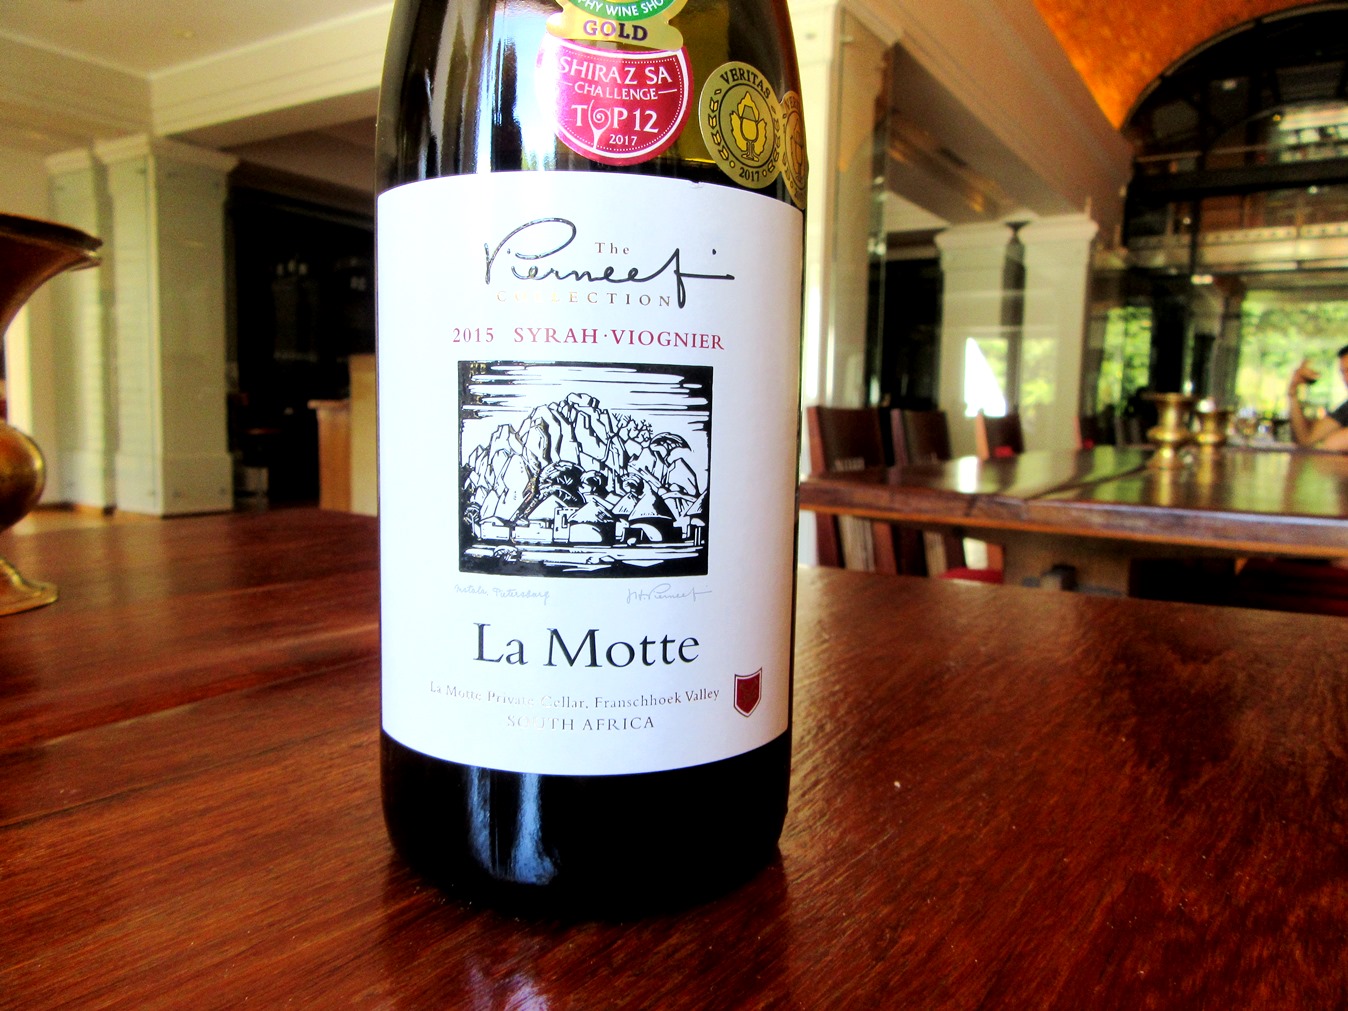 La Motte, The Pierneef Collection Syrah Viognier 2015, Western Cape, South Africa, Wine Casual